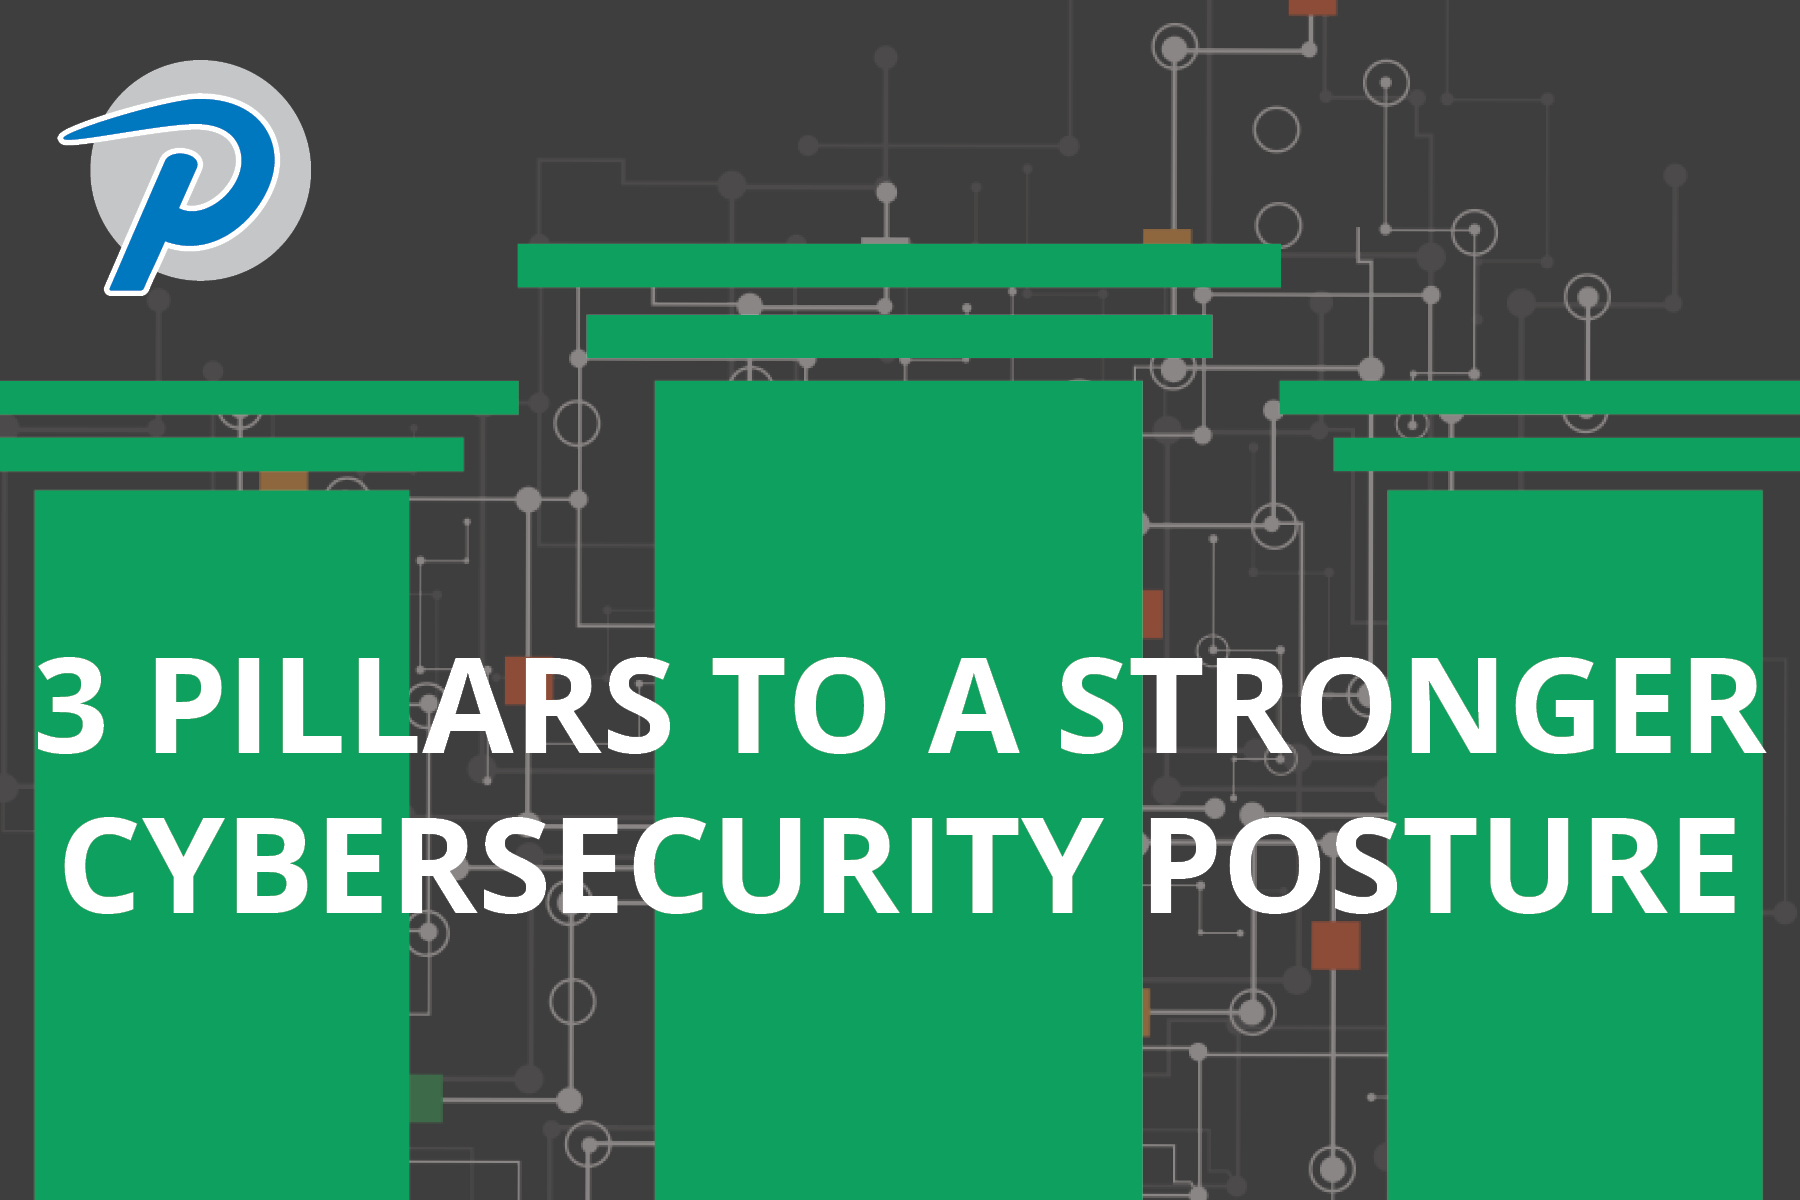 3 pillar approach to a stronger cybersecurity posture